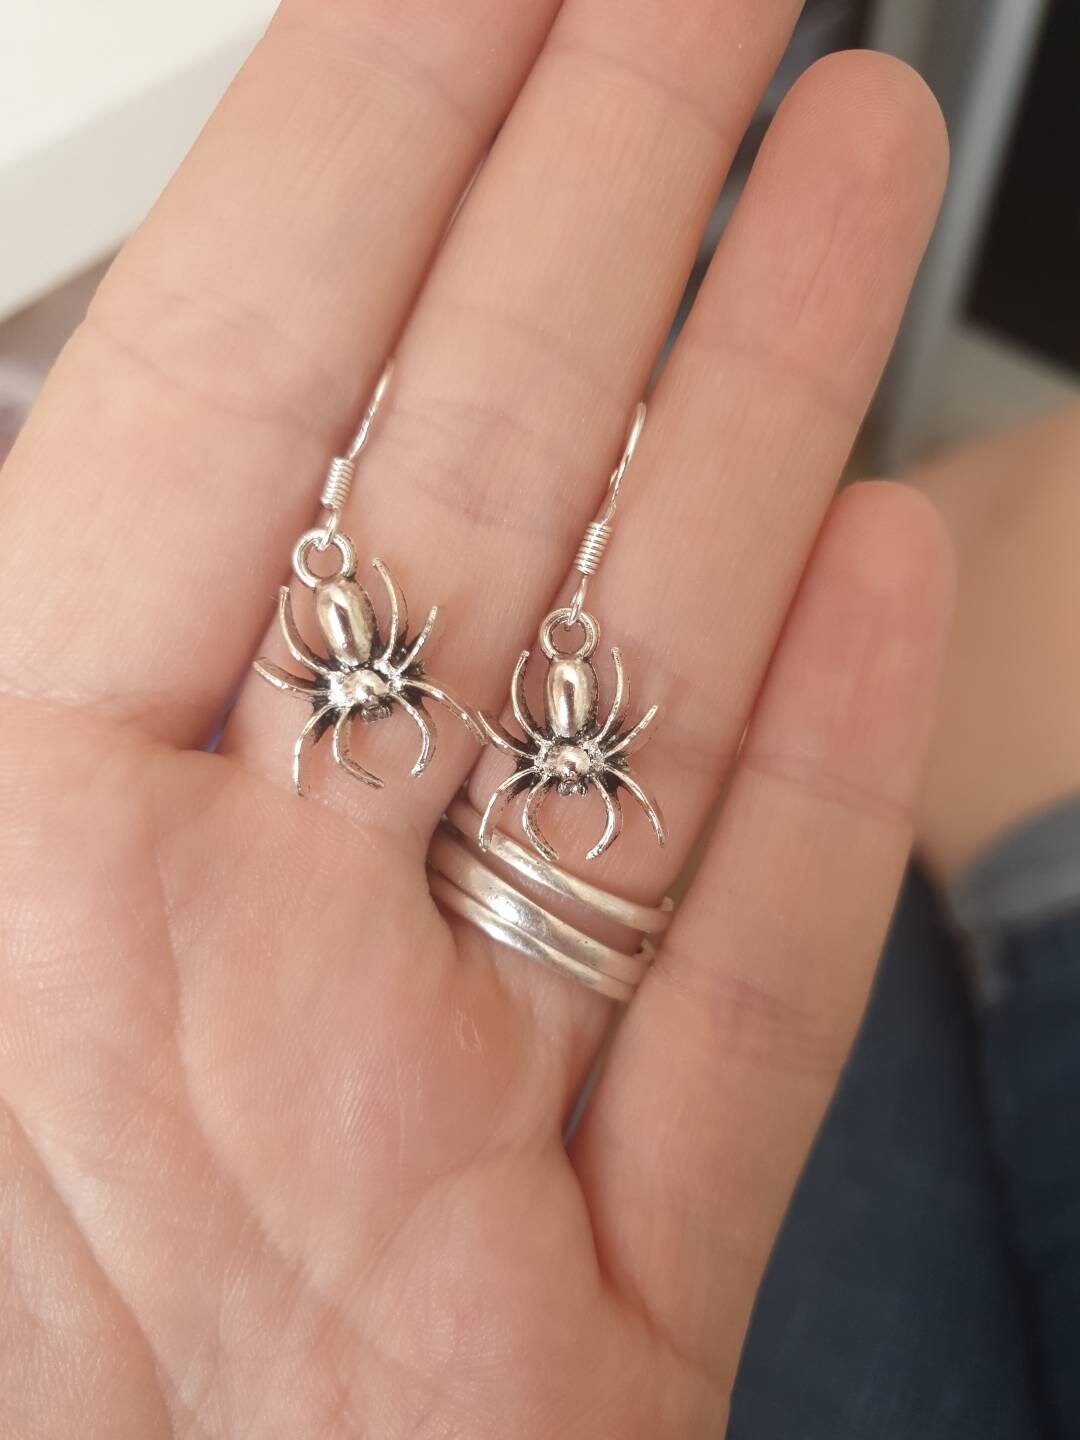 Handmade Antique Silver Spider Dangly, Charm Earrings In Gift Bag Perfect For Halloween - Premium  from Etsy - Just £4.99! Shop now at Uniquely Holt